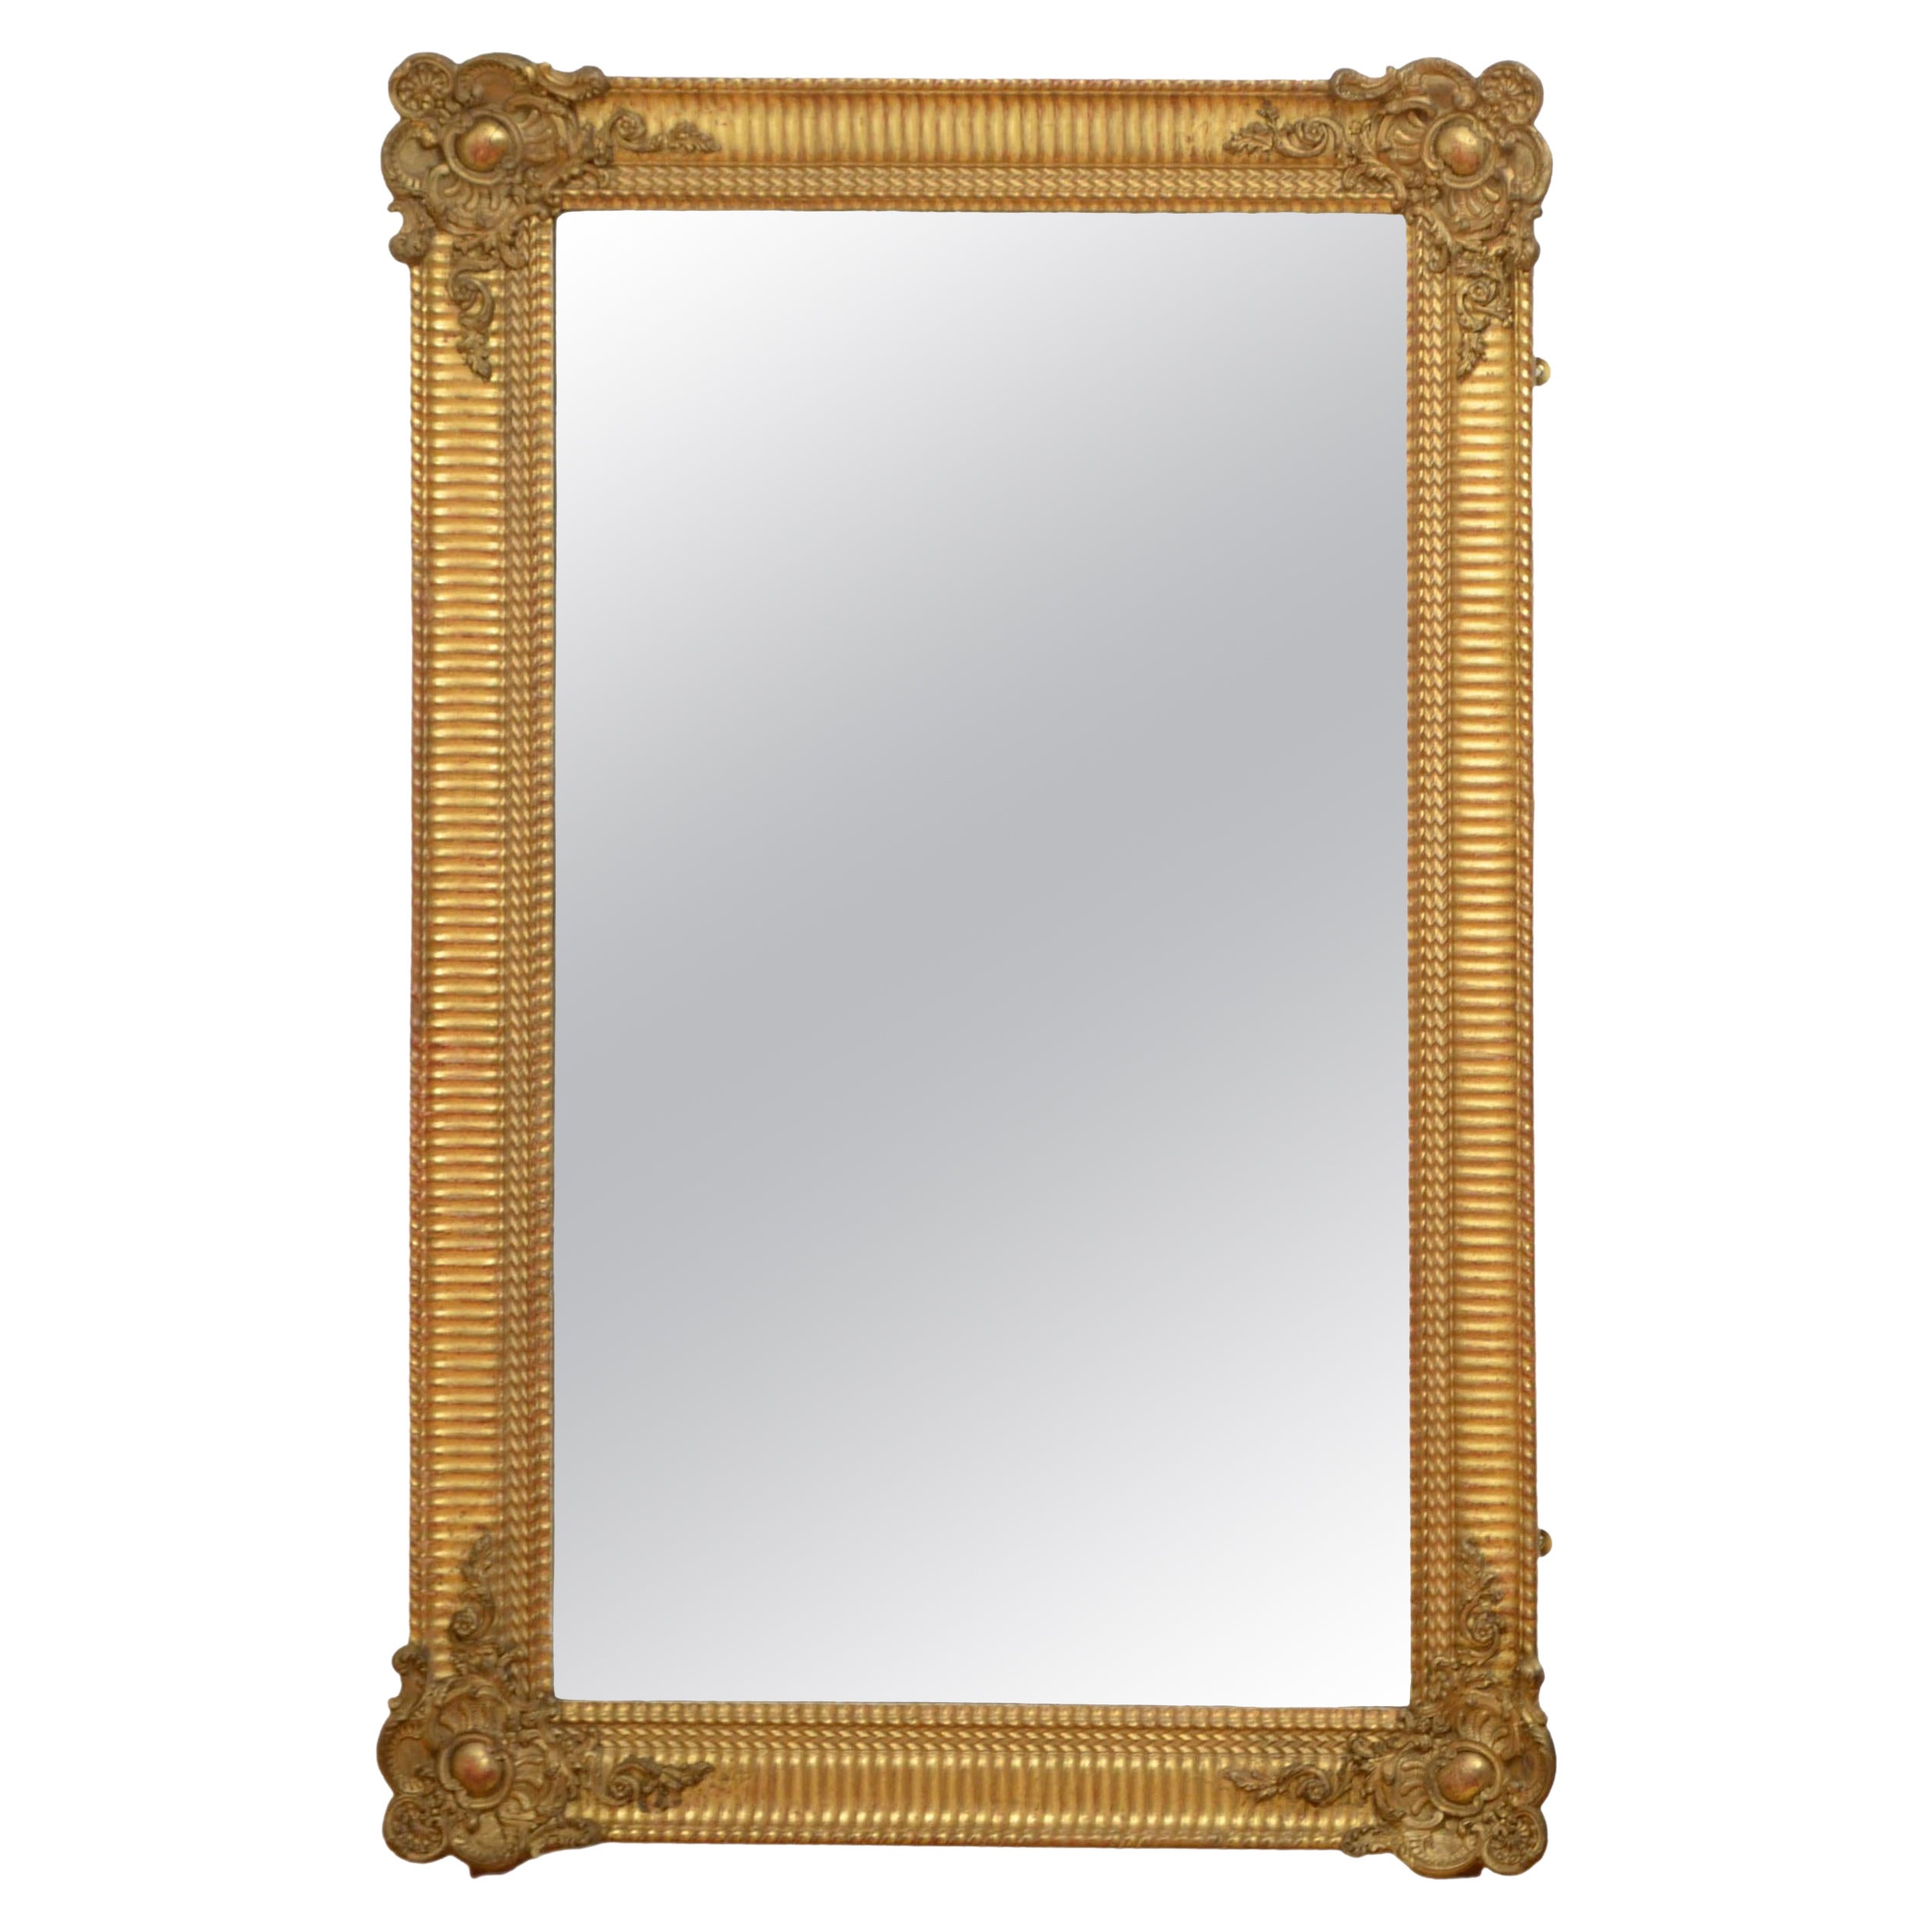 Early 19th Century Giltwood Wall Mirror For Sale